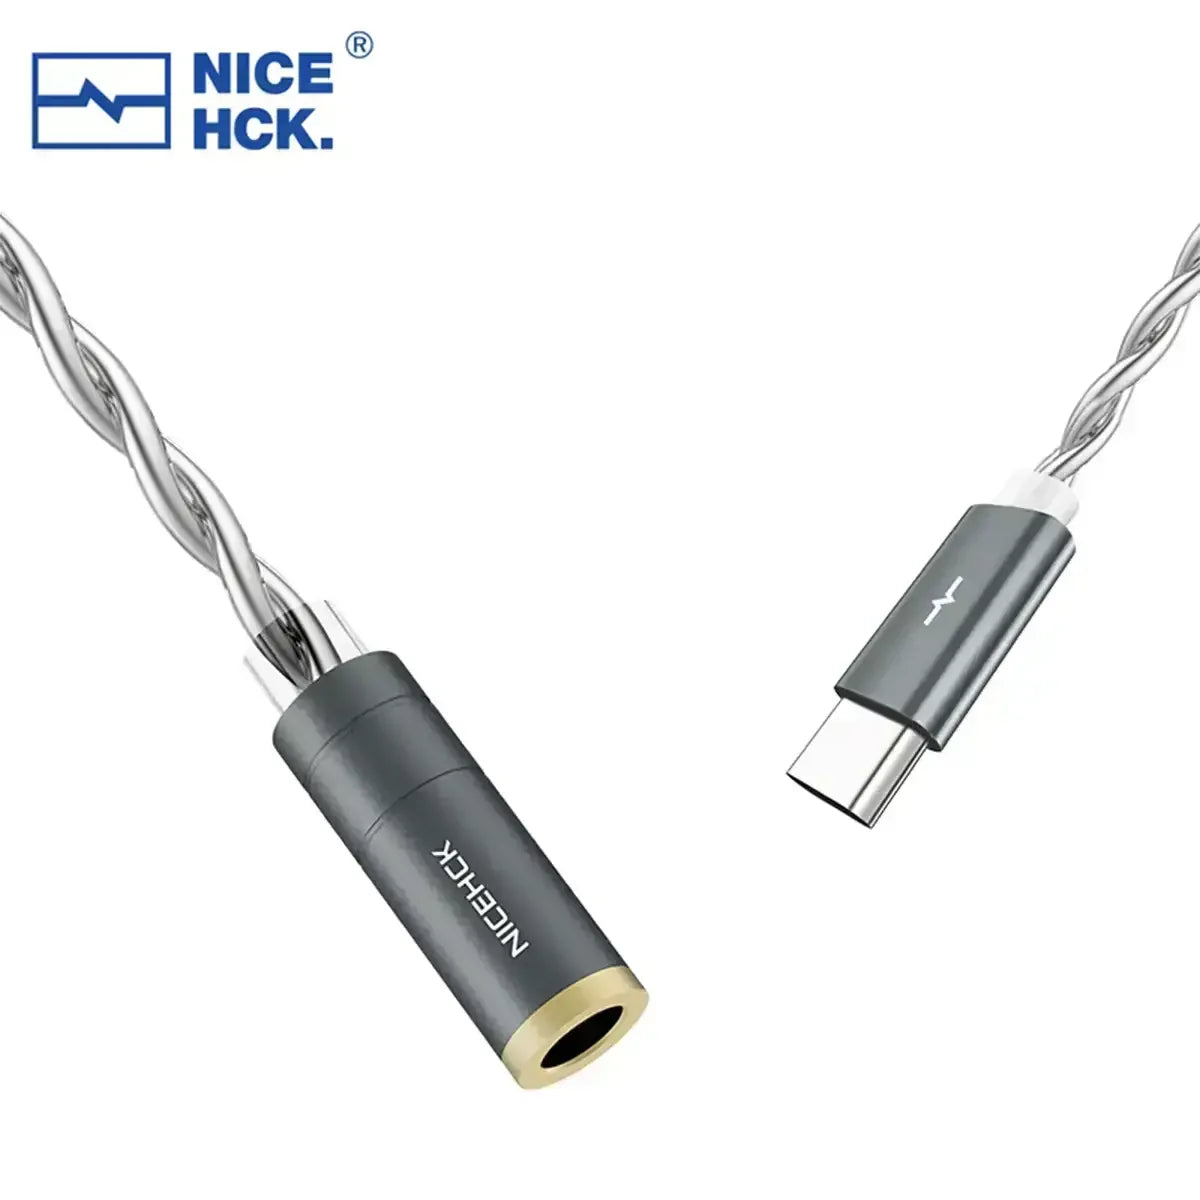 NiceHCK NK1 CX31993 Decoding Chip Type-C to 3.5mm Cable - The HiFi Cat